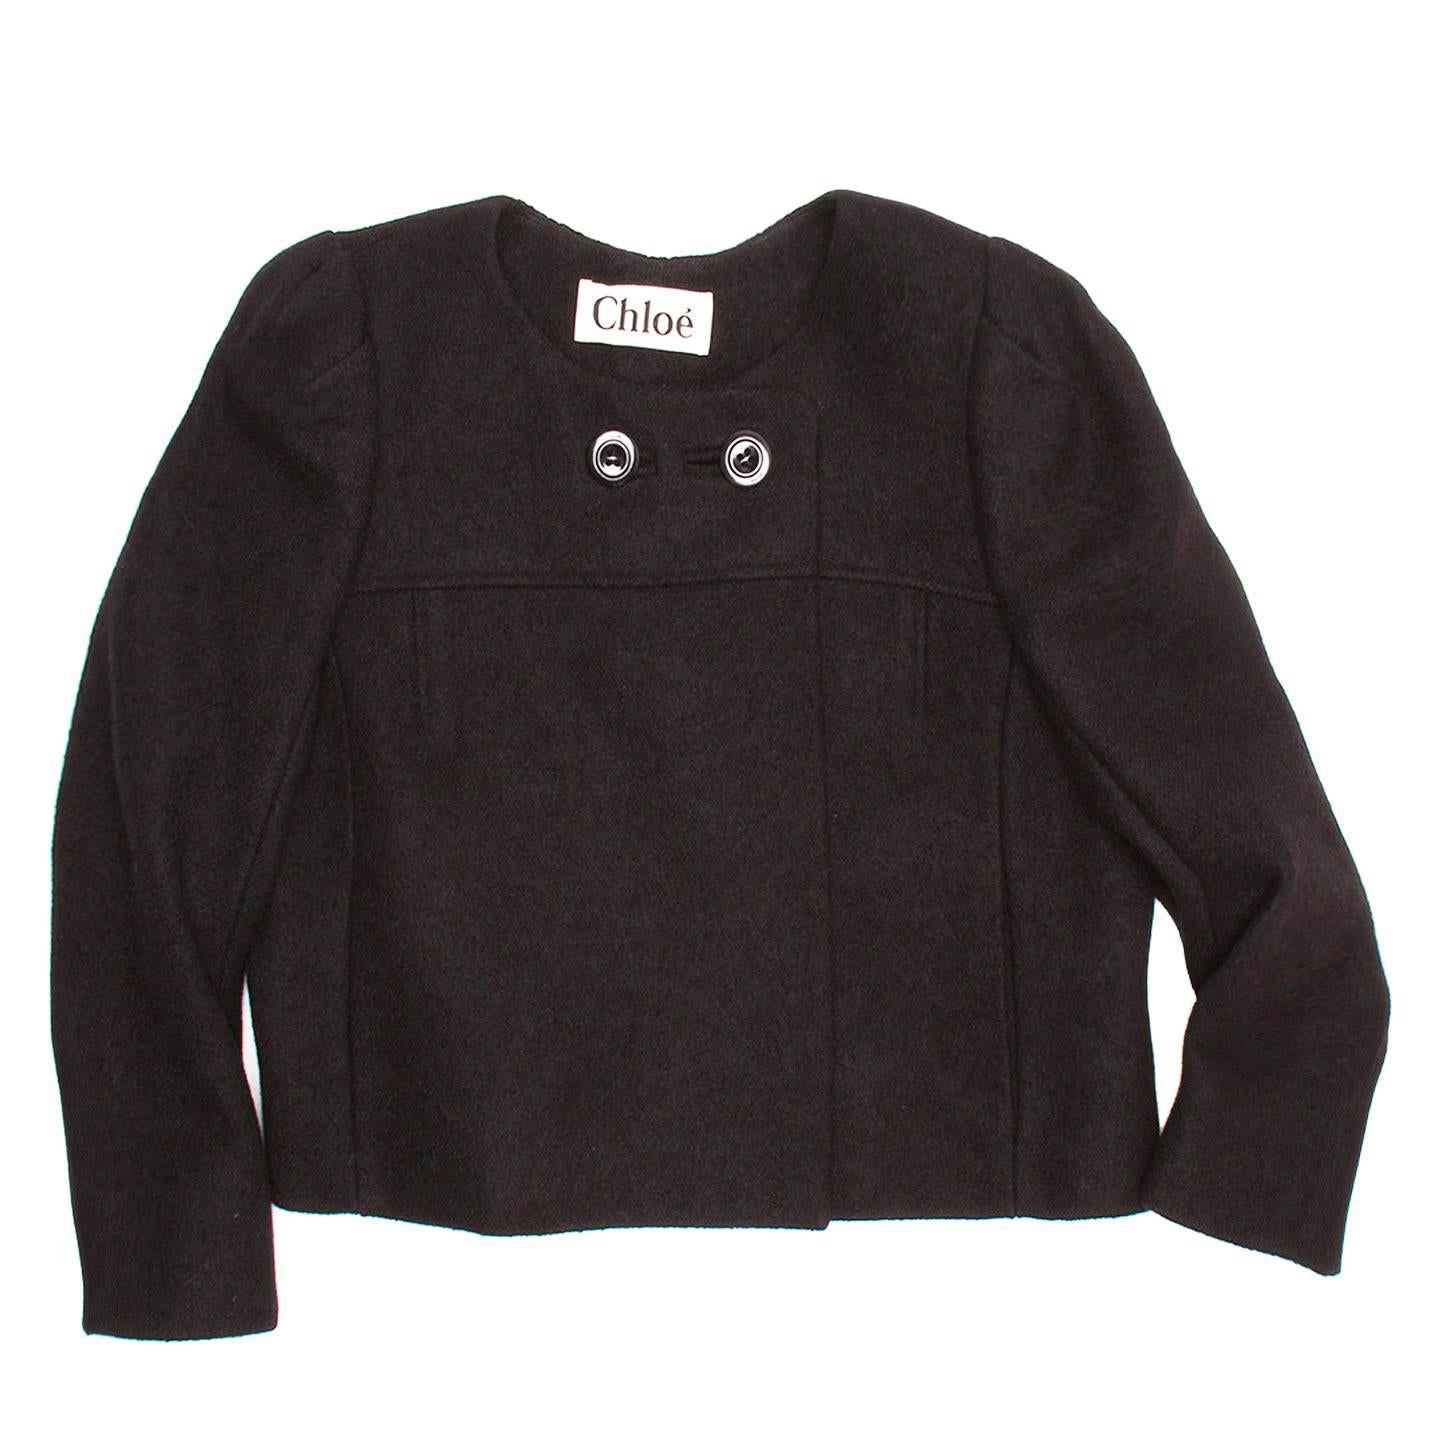 Cropped black boiled wool blazer with horizontal yoke and double black button detail on collar.

Size  44 French sizing

Condition  Excellent: never worn